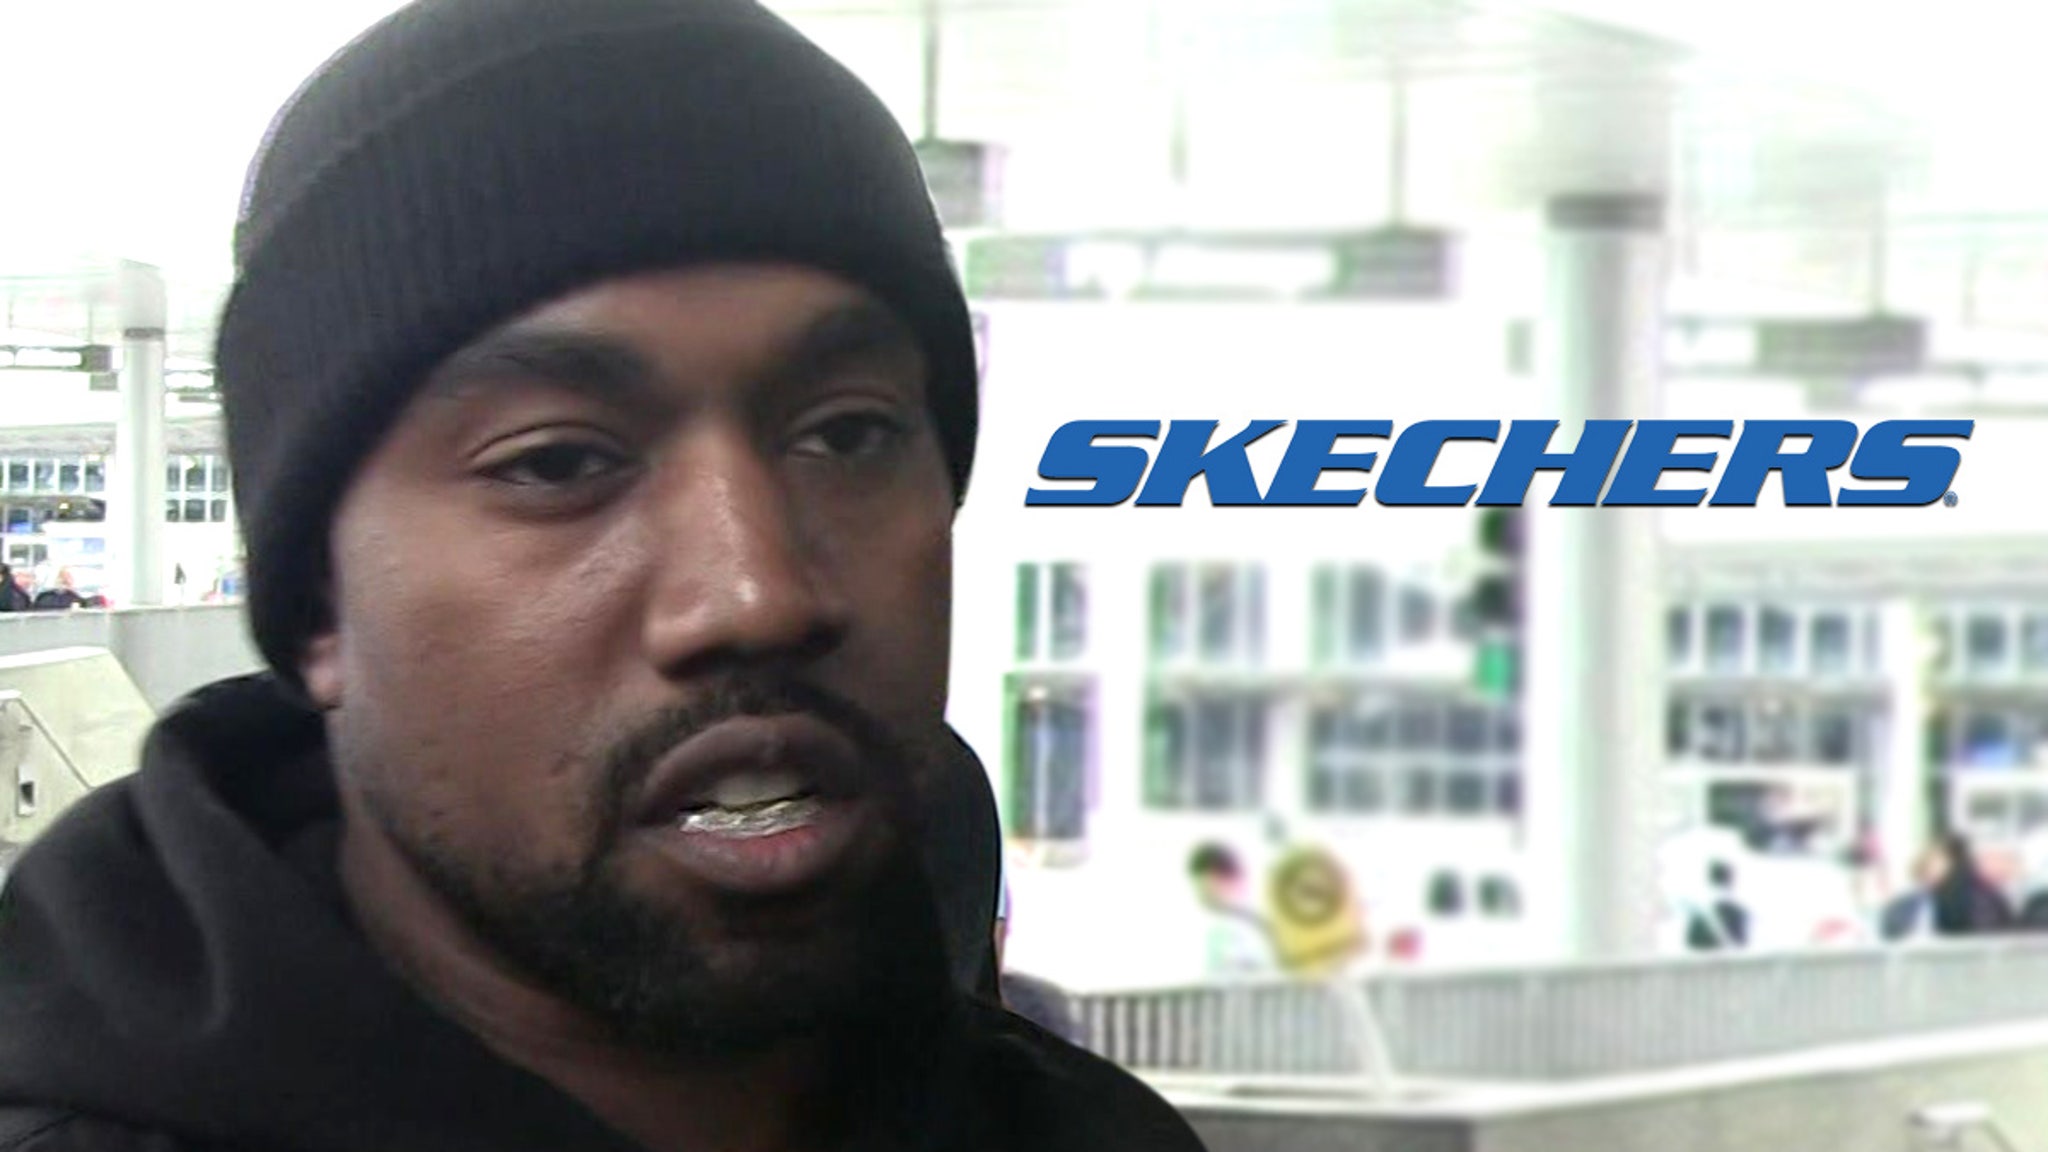 Kanye West shows up uninvited at Skechers headquarters in the wake of Adidas Fallout